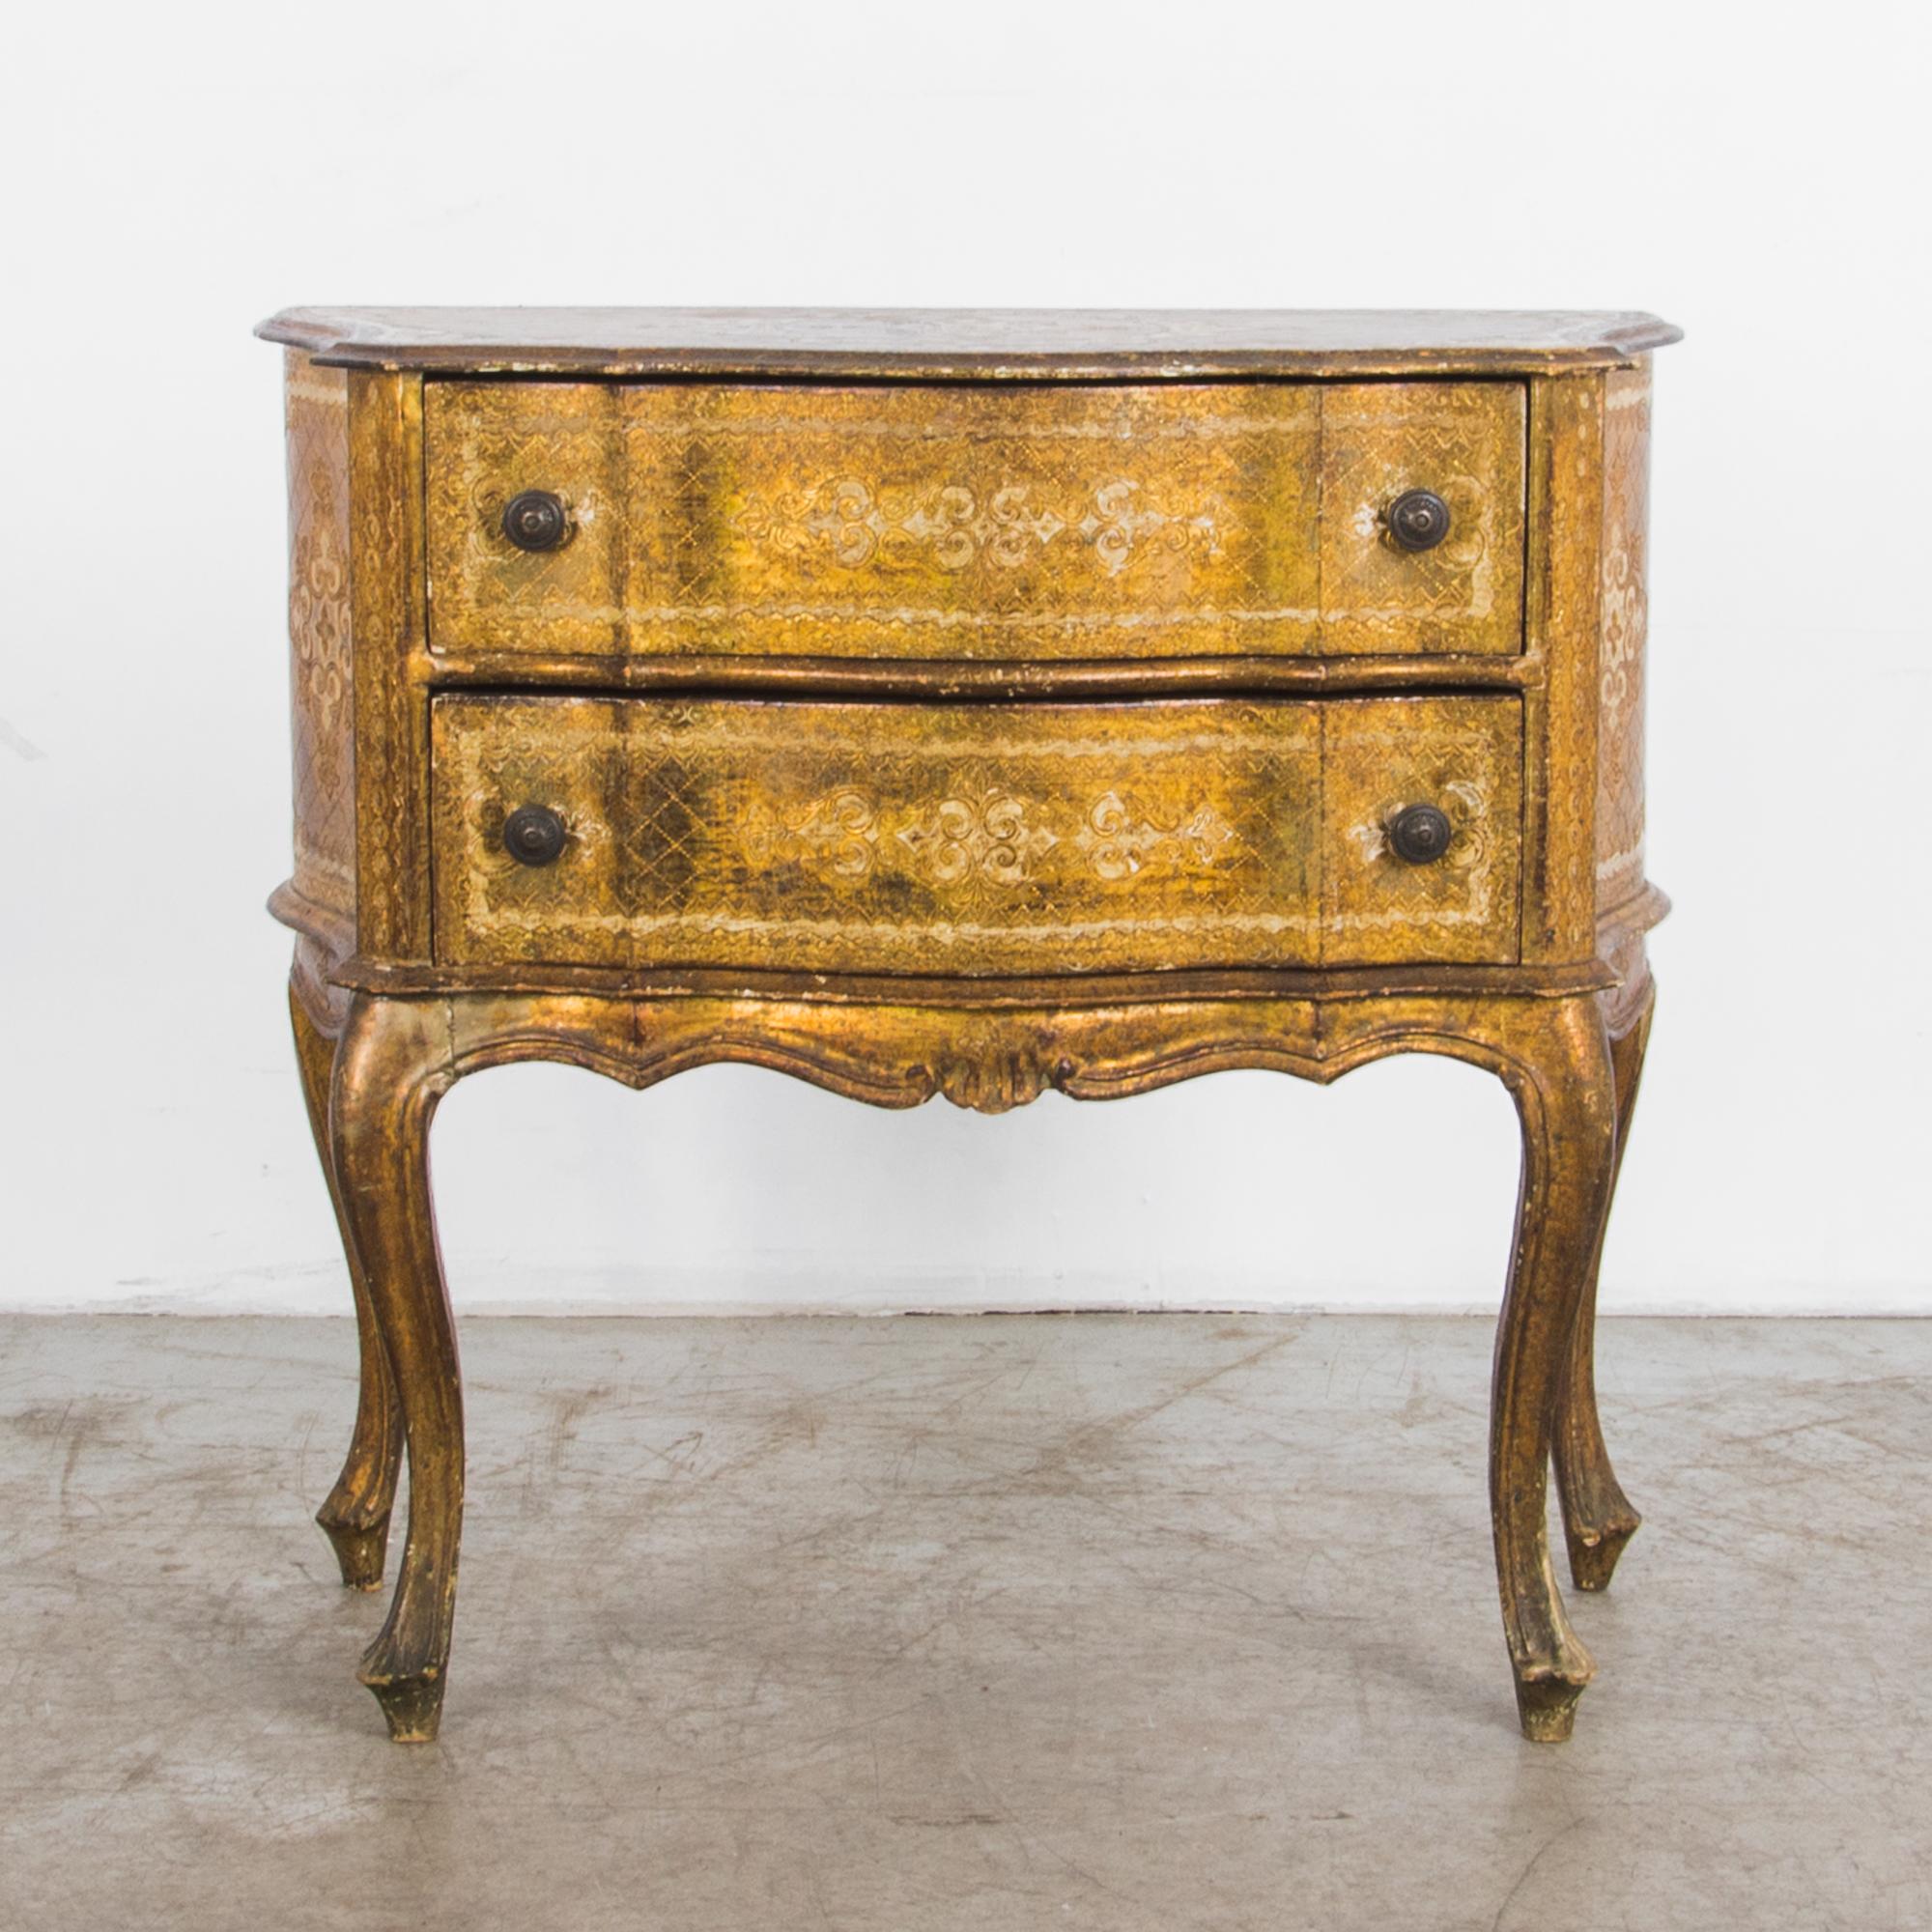 This gilded wooden chest of drawers was made in Italy in the 1960s. Elegantly aged, a refined shape is contrasted with a textured patina and elaborate carved ornament.

A set of serpentine double drawers sits atop slender cabriole legs, the fluid